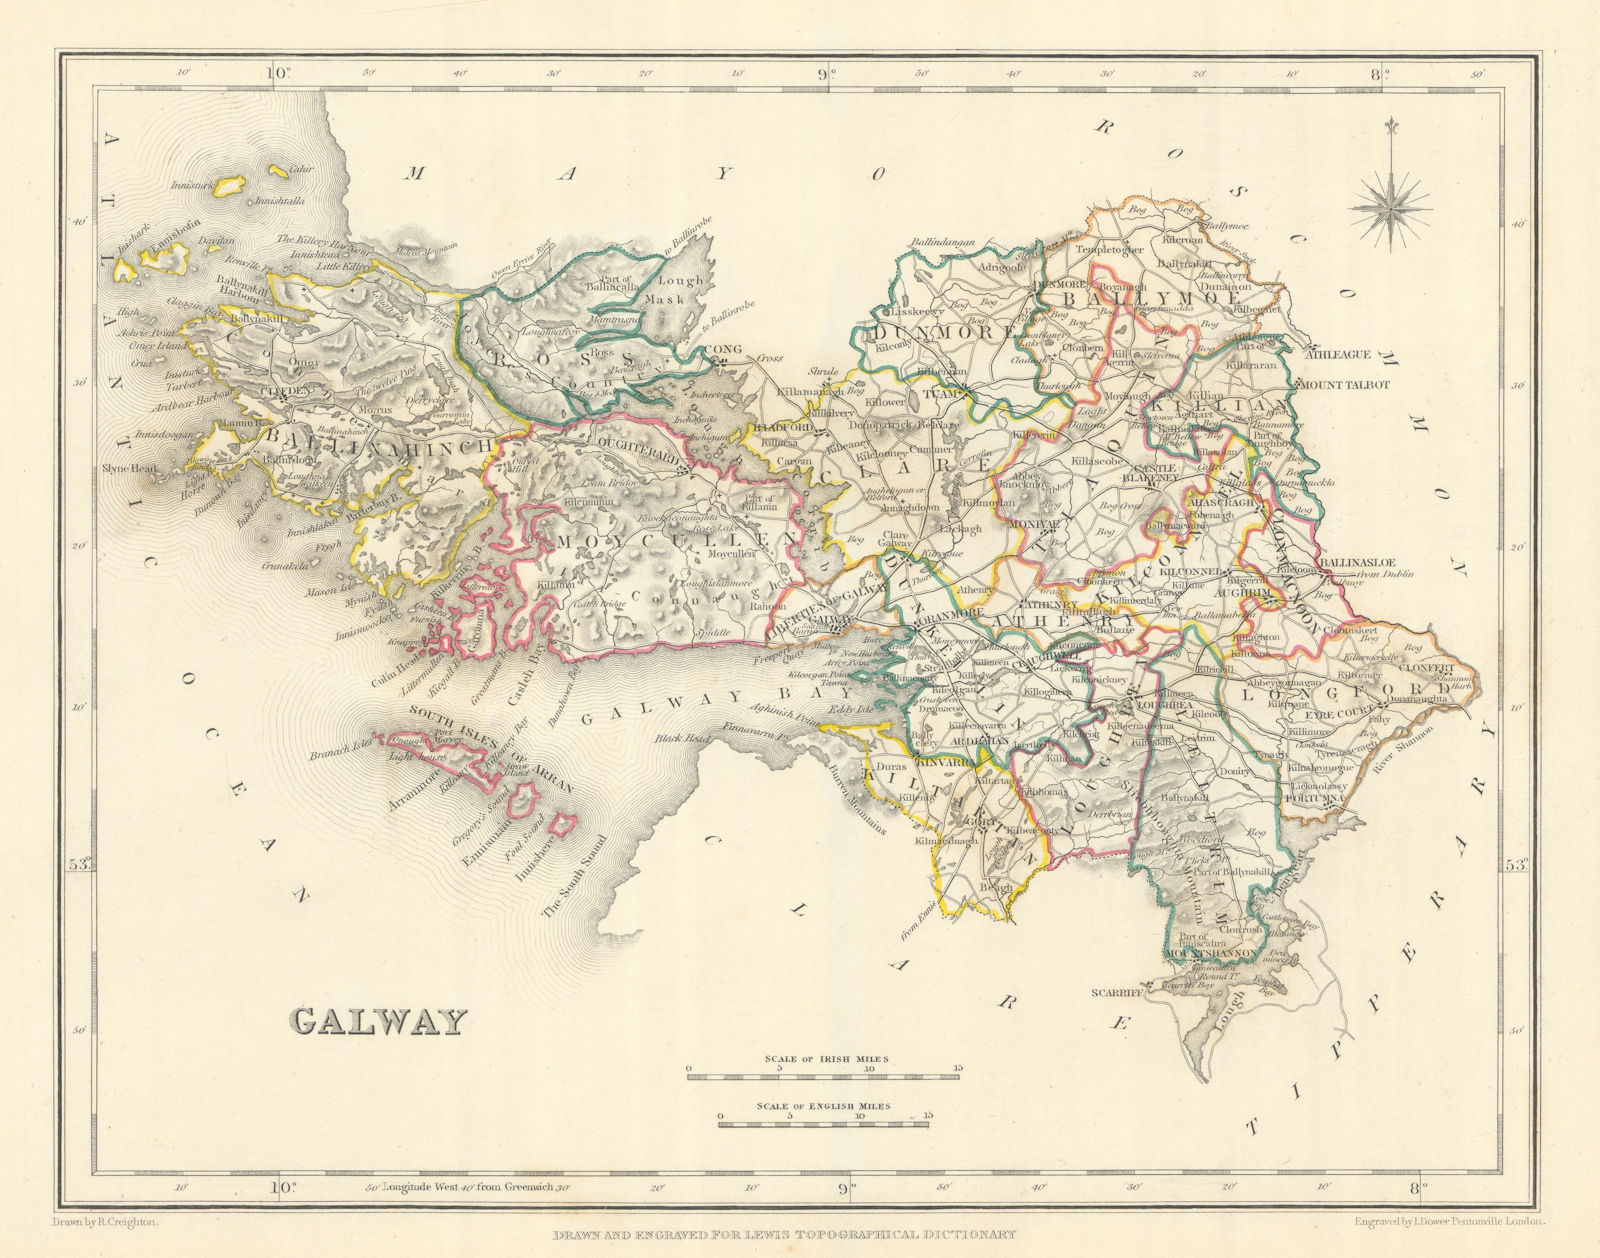 COUNTY GALWAY antique map for LEWIS by CREIGHTON & DOWER. Ireland 1850 old